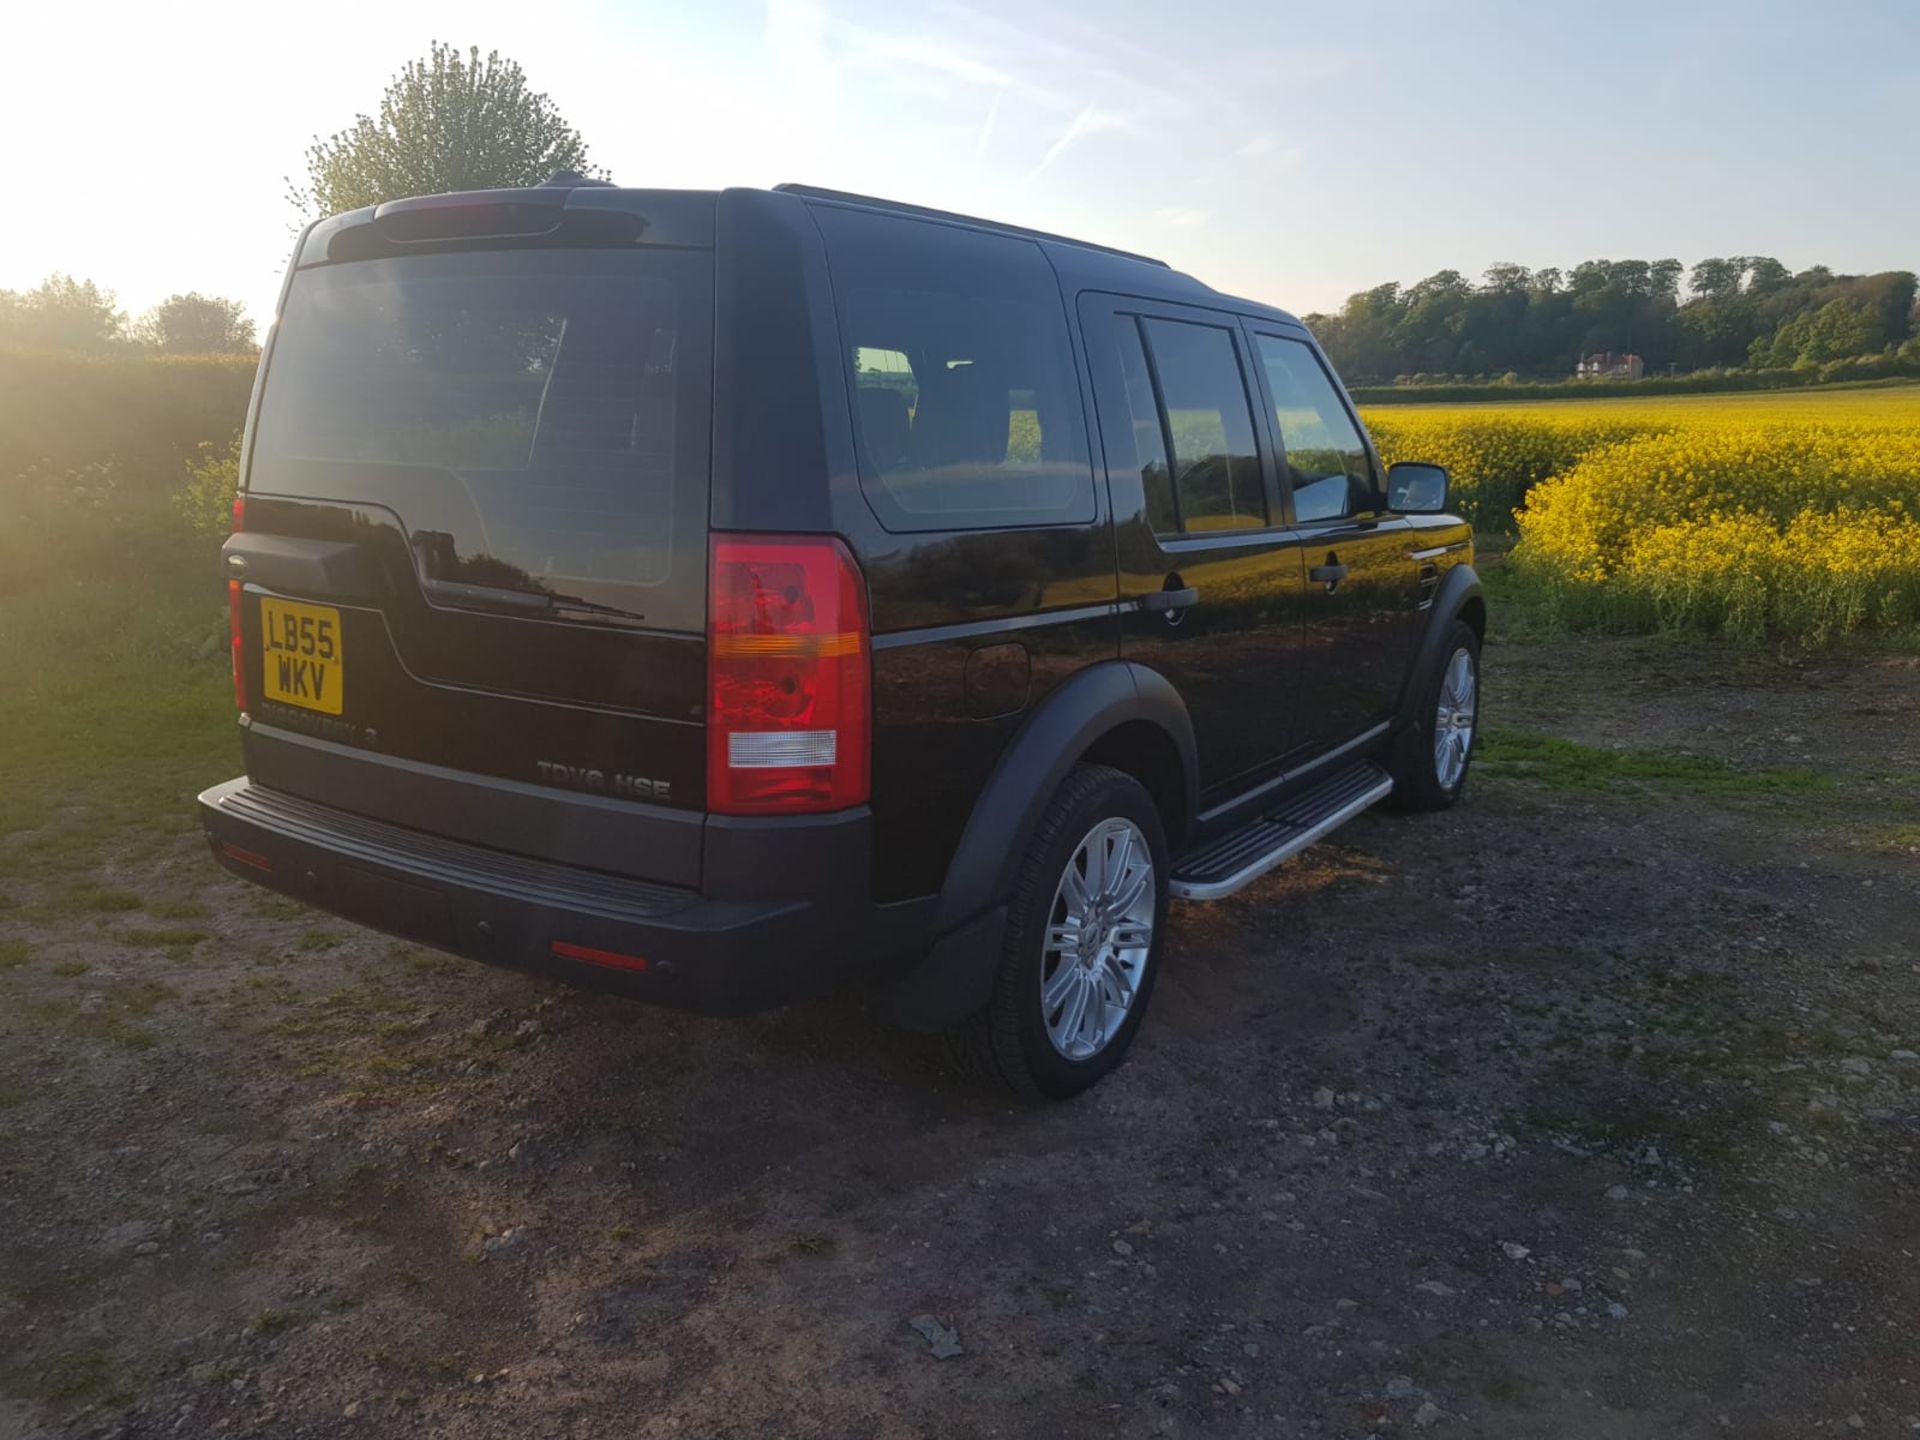 2006/55 REG LAND ROVER DISCOVERY 3 TDV6 AUTO 2.7 DIESEL BLACK 7 SEATER *NO VAT* - Image 6 of 12